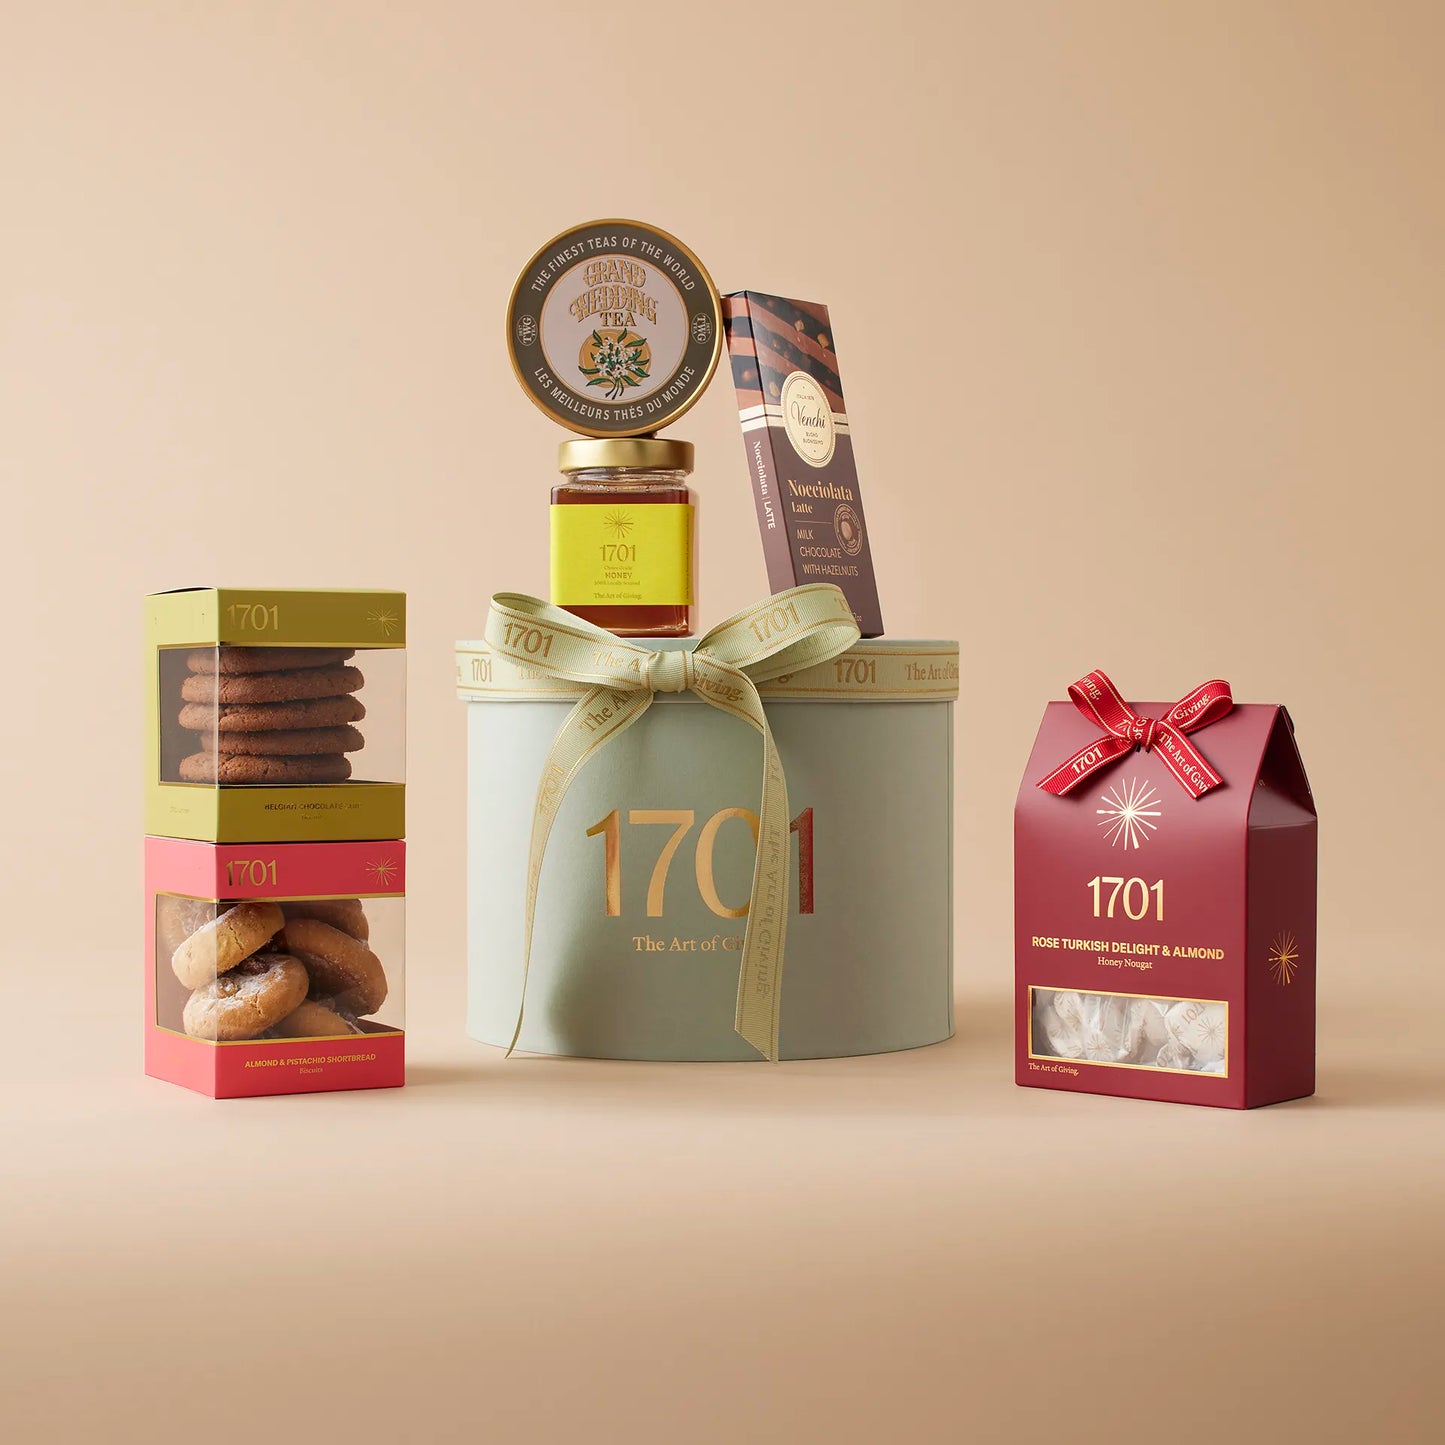 The Terrific Teatime Gift Box is presented on a warm background. The gift box includes a box of handcrafted honey nougat, two boxes of biscuits, a jar of farm honey, an imported Italian chocolate, and a stunning tin of TWG tea. This gift box is designed for sharing a perfect cup of tea with a close friend, indulging in the luxury of fine treats. The green and gold design of the gift box adds a touch of elegance to this special gift, making it perfect for any occasion or just because.